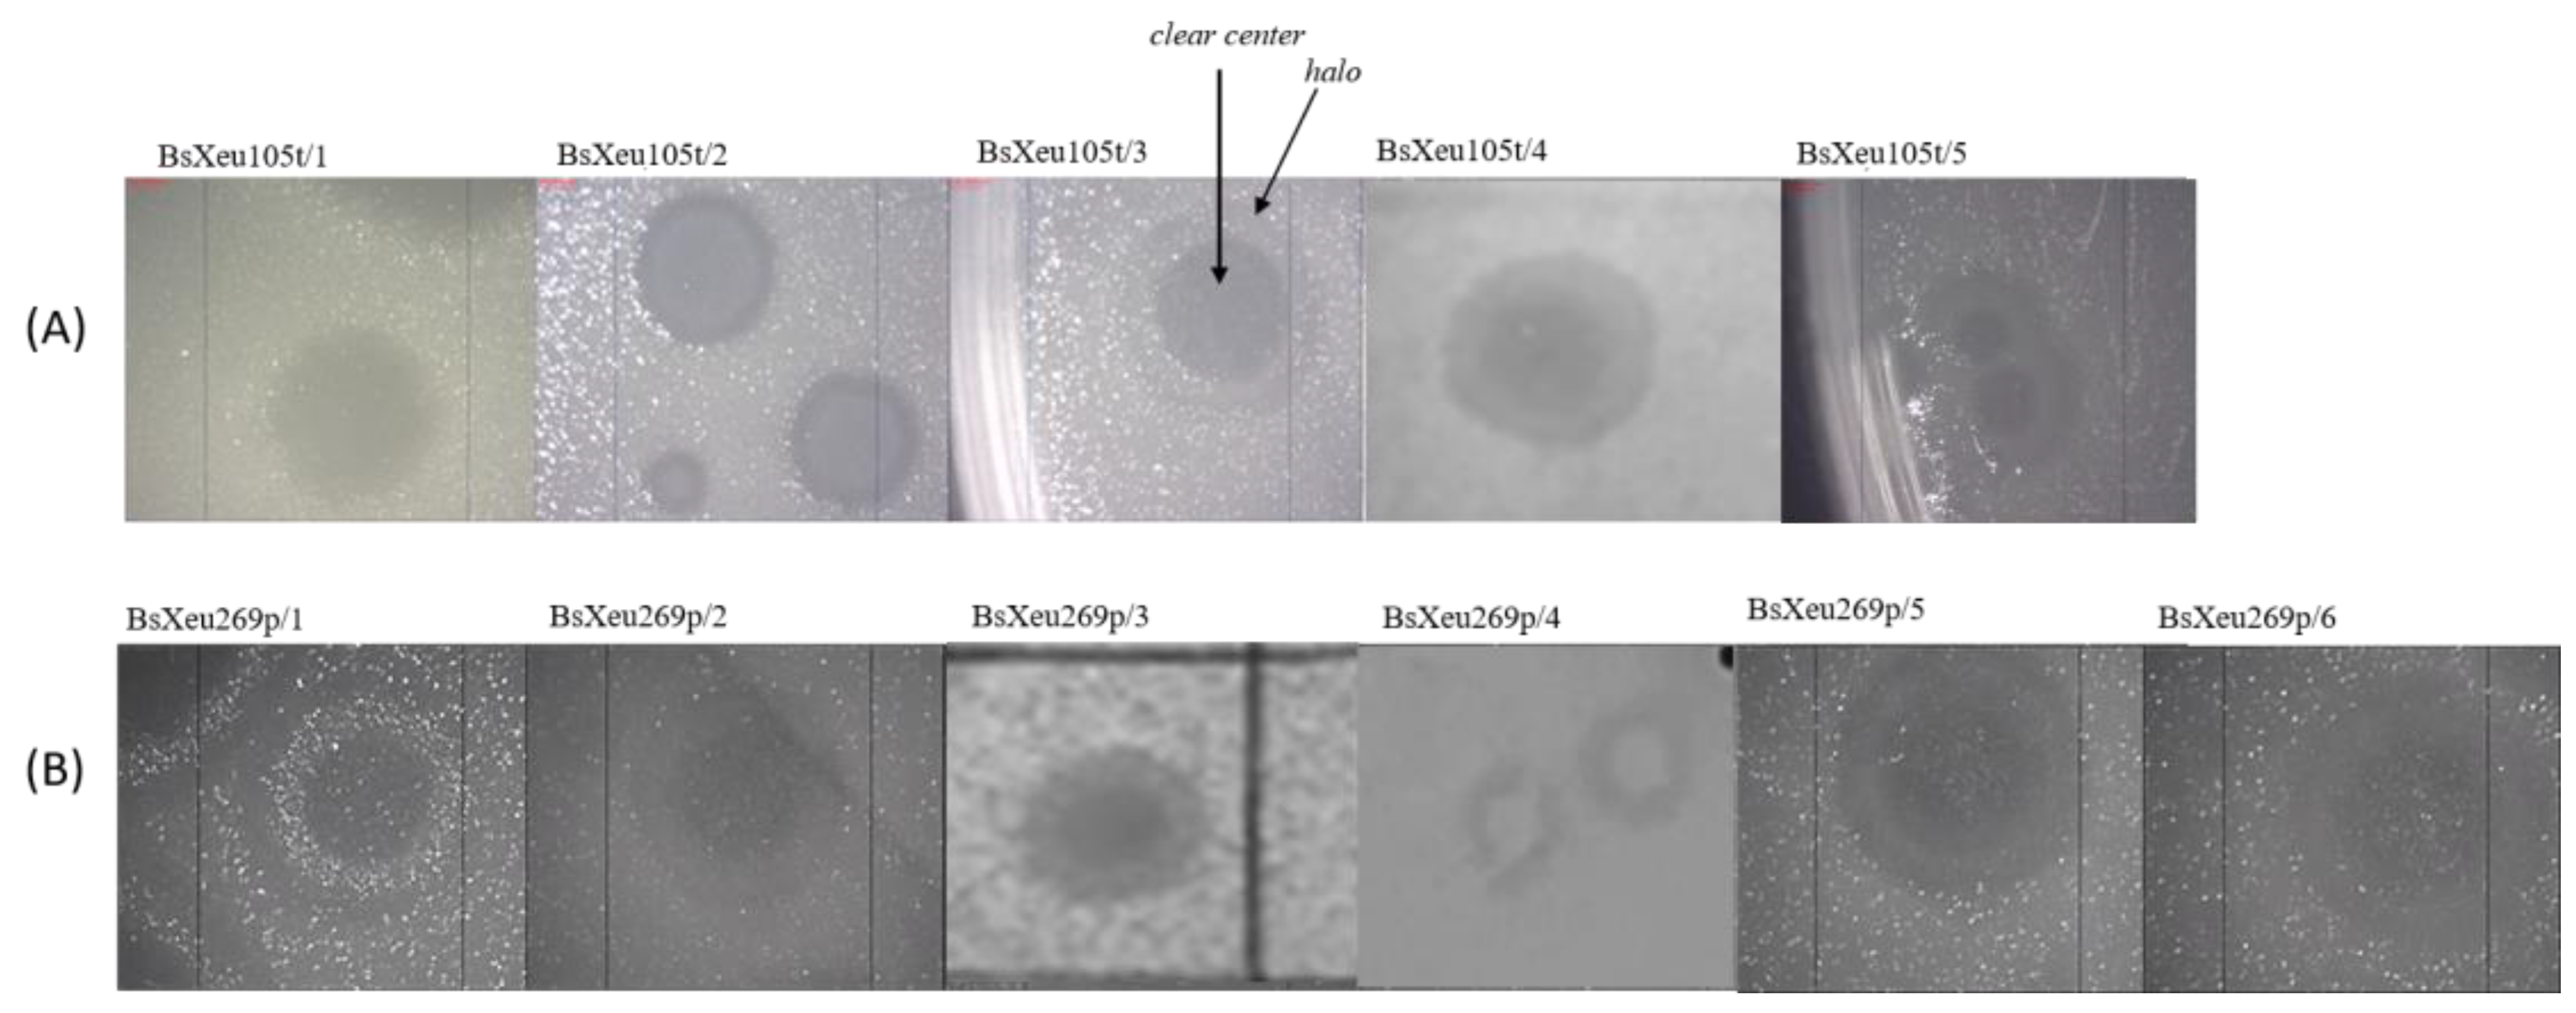 Plants | Free Full-Text | Phenotypic and Genotypic Characterization of  Newly Isolated Xanthomonas euvesicatoria-Specific Bacteriophages and  Evaluation of Their Biocontrol Potential